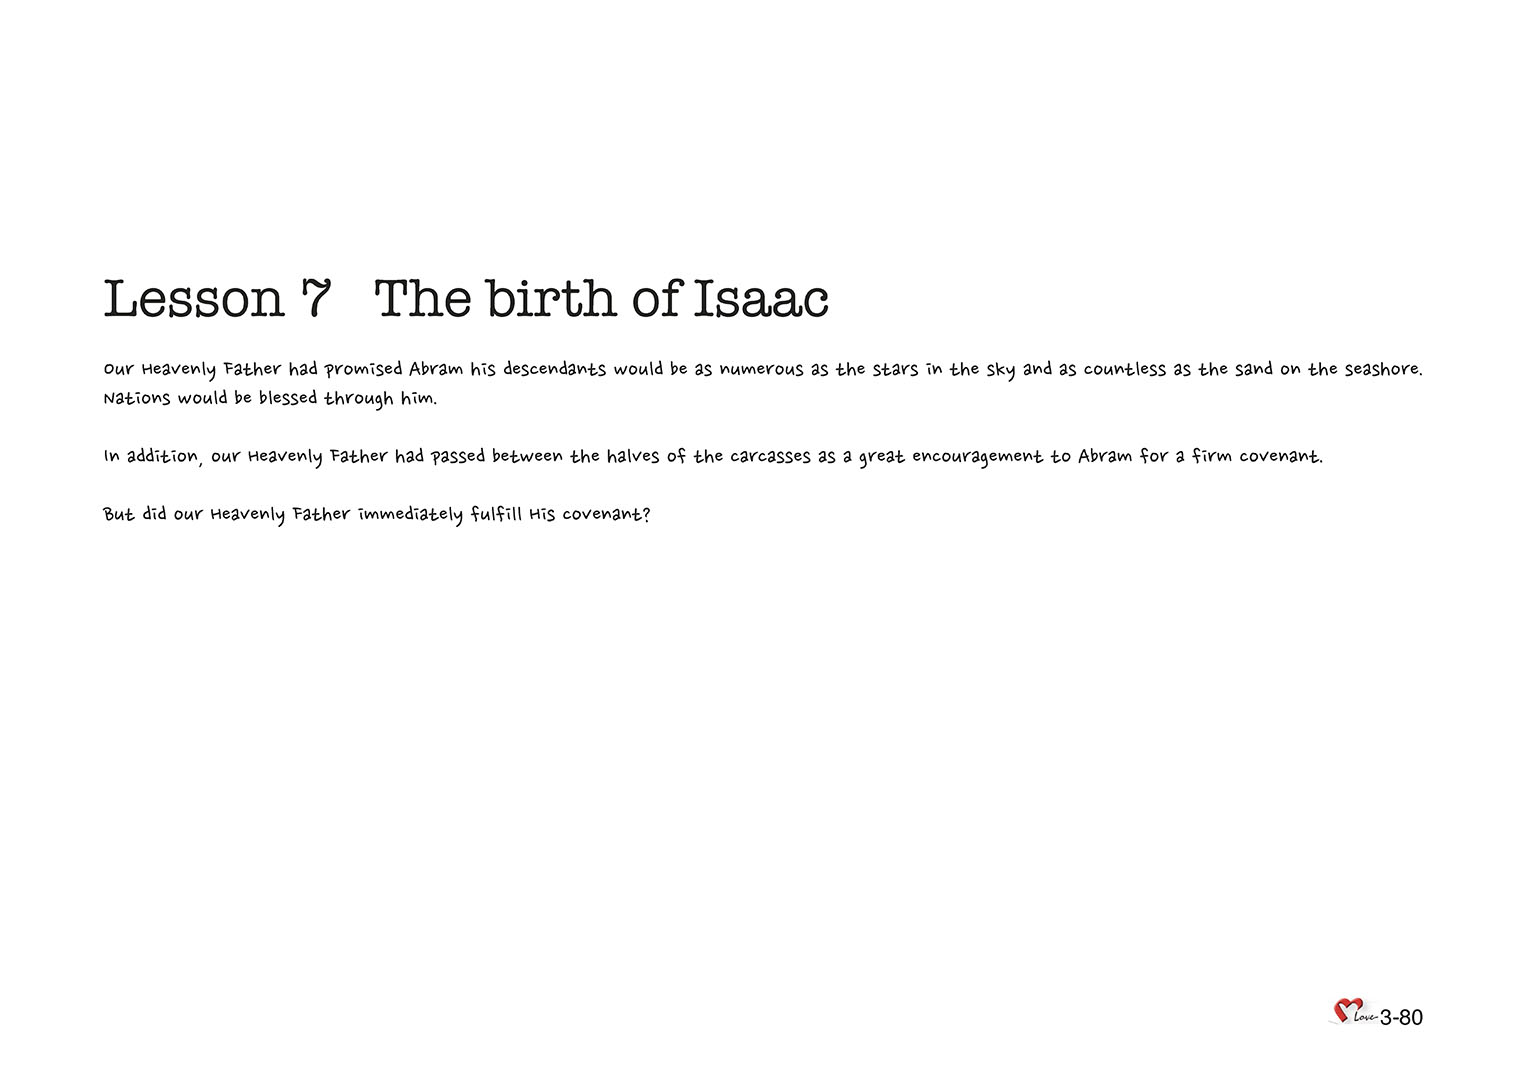 Chapter 3 - Lesson 7 - The birth of Isaac